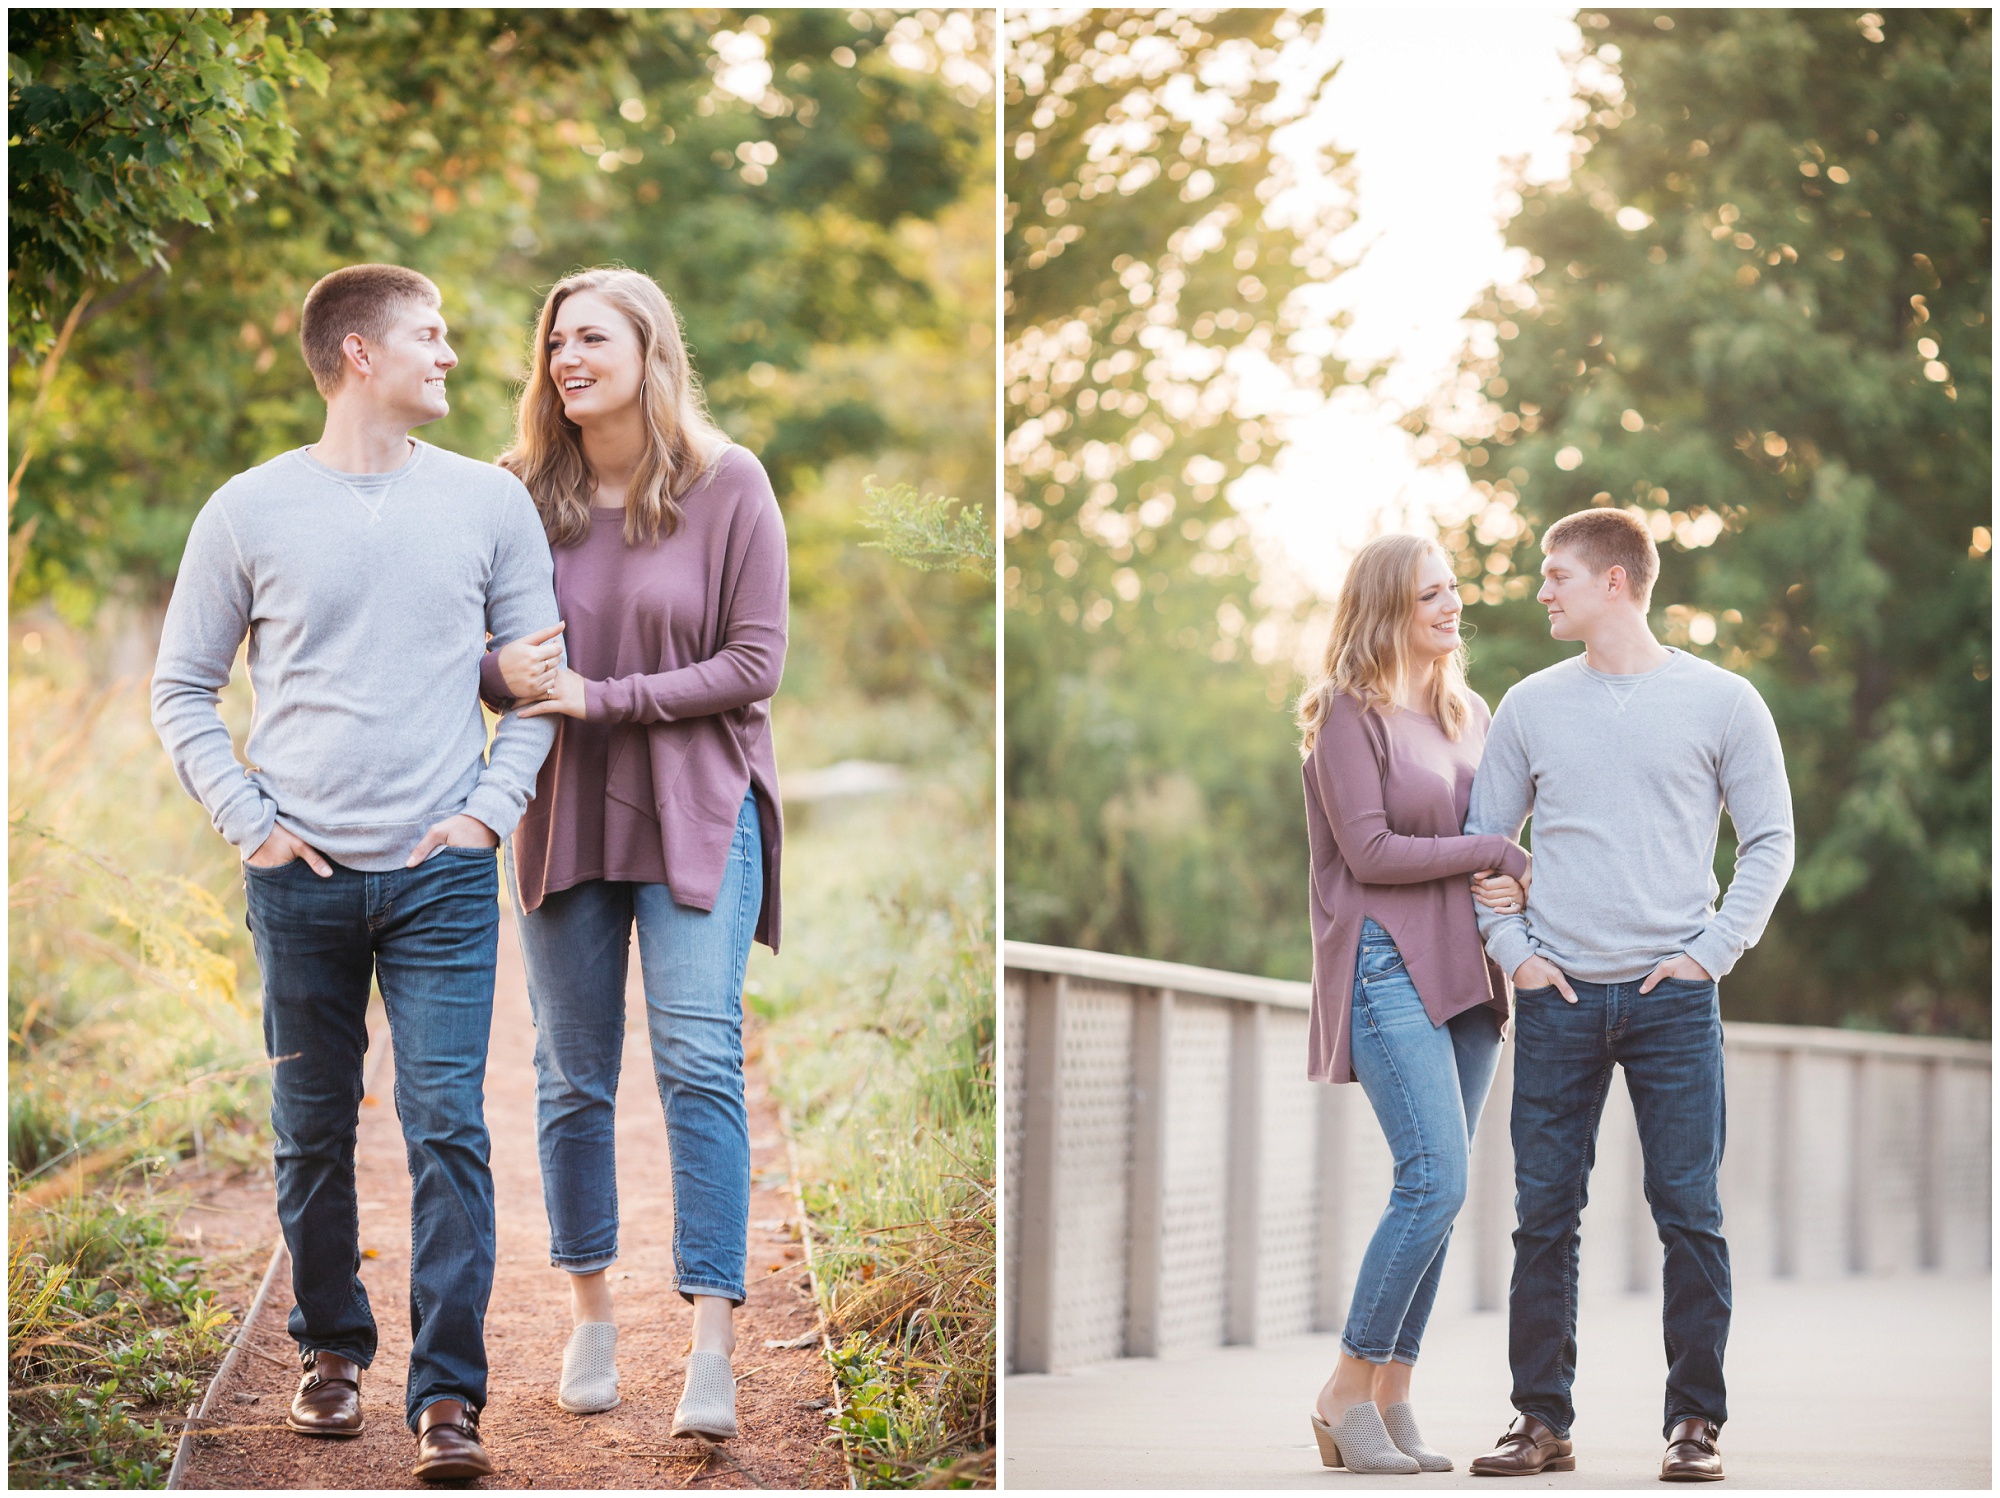 Nashville Engagement Photos from a downtown Nashville engagement session by wedding photographer Meredith Teasley